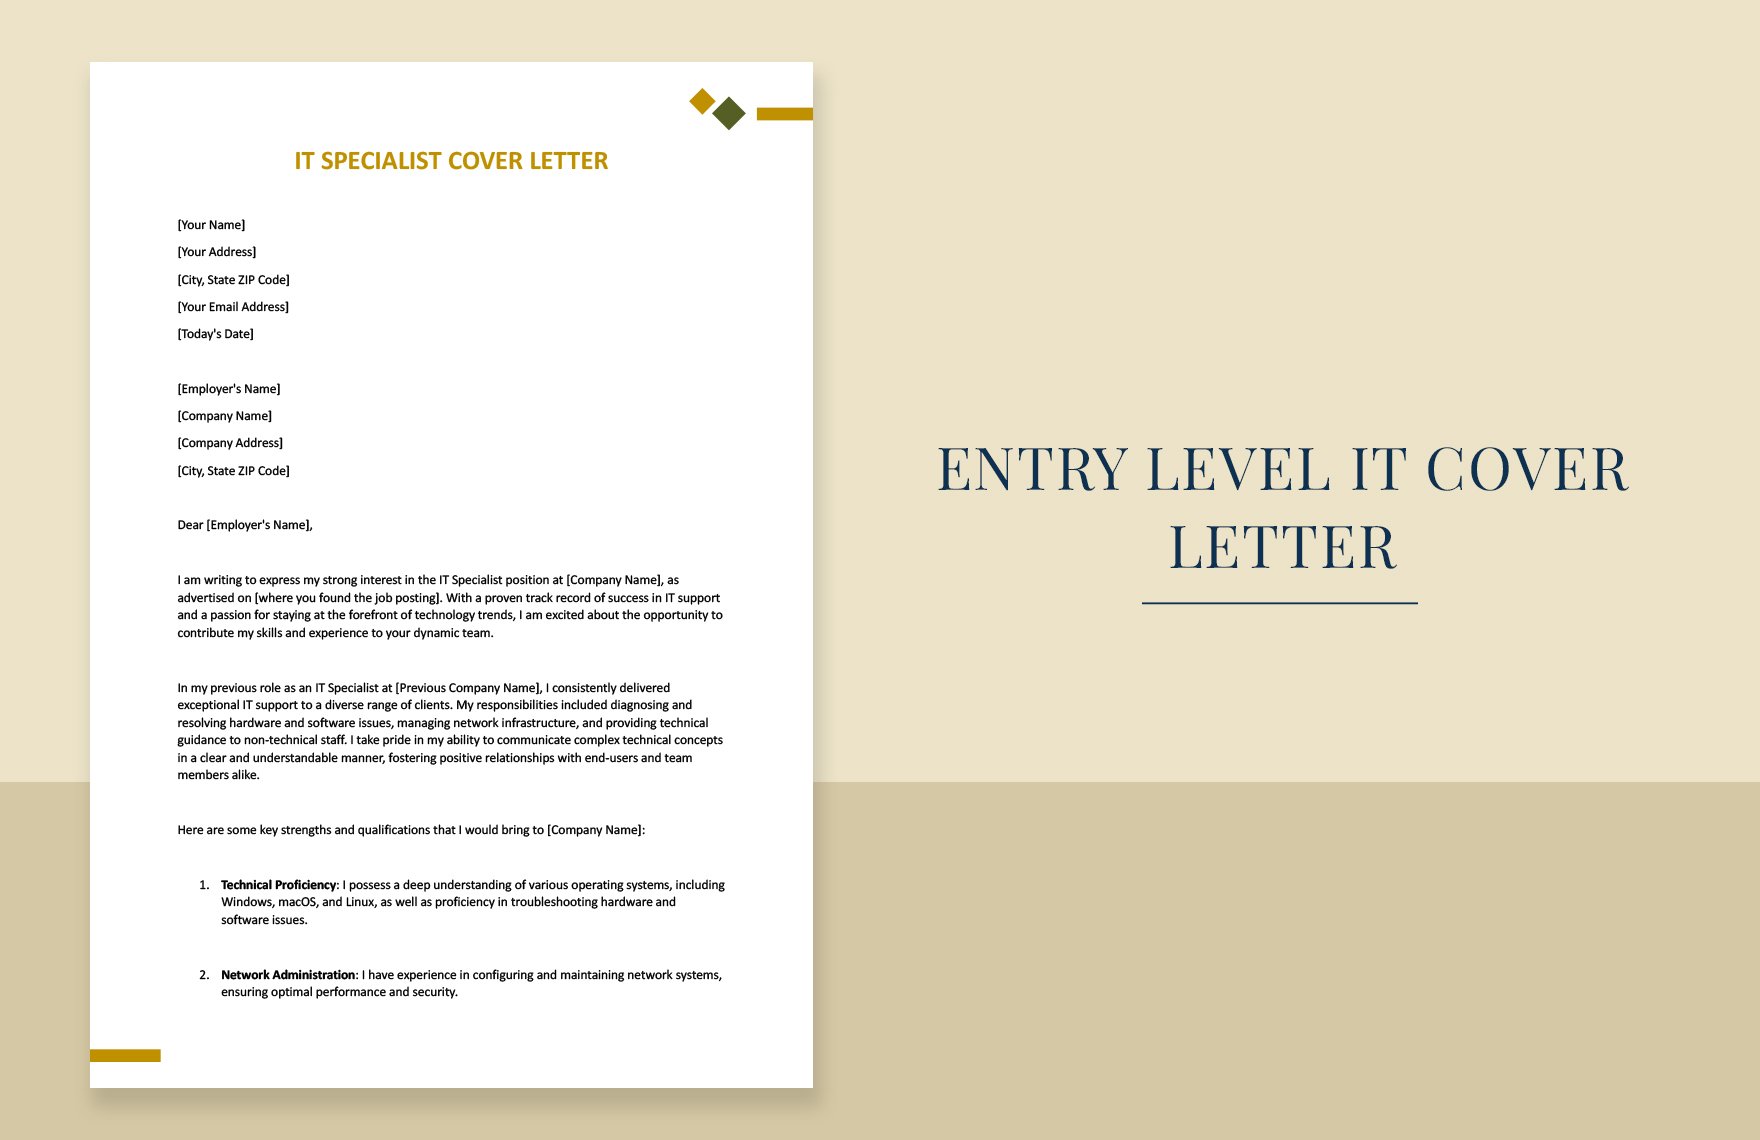 Free IT Specialist Cover Letter - Download in Word, Google Docs ...